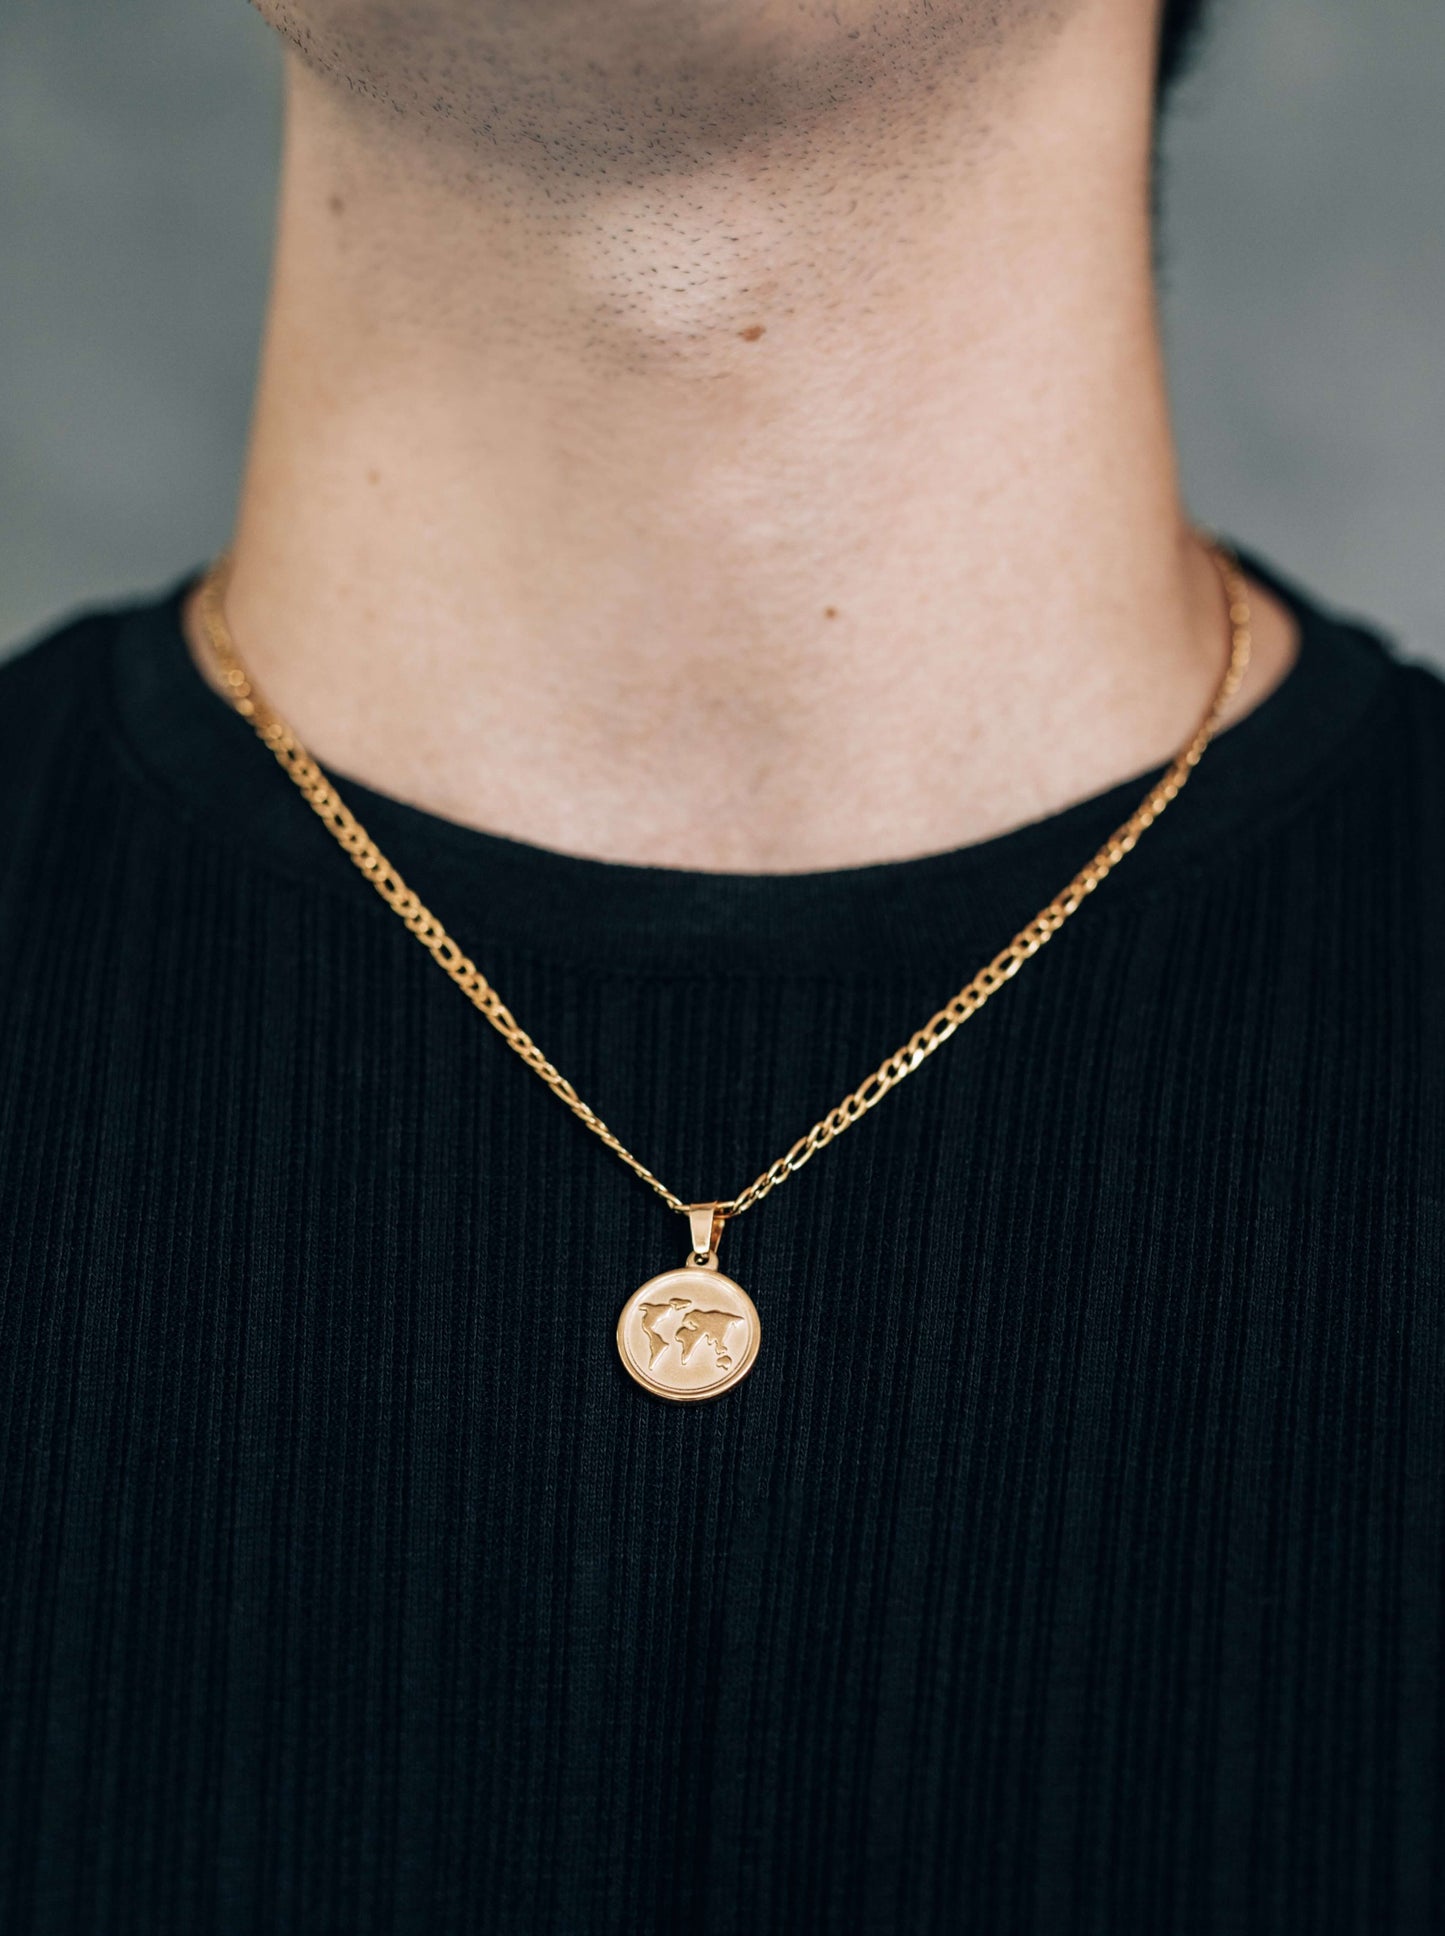 Gold World Map Pendant Necklace 3mm Figaro Chain For Men or Women - Necklace - Boutique Wear RENN